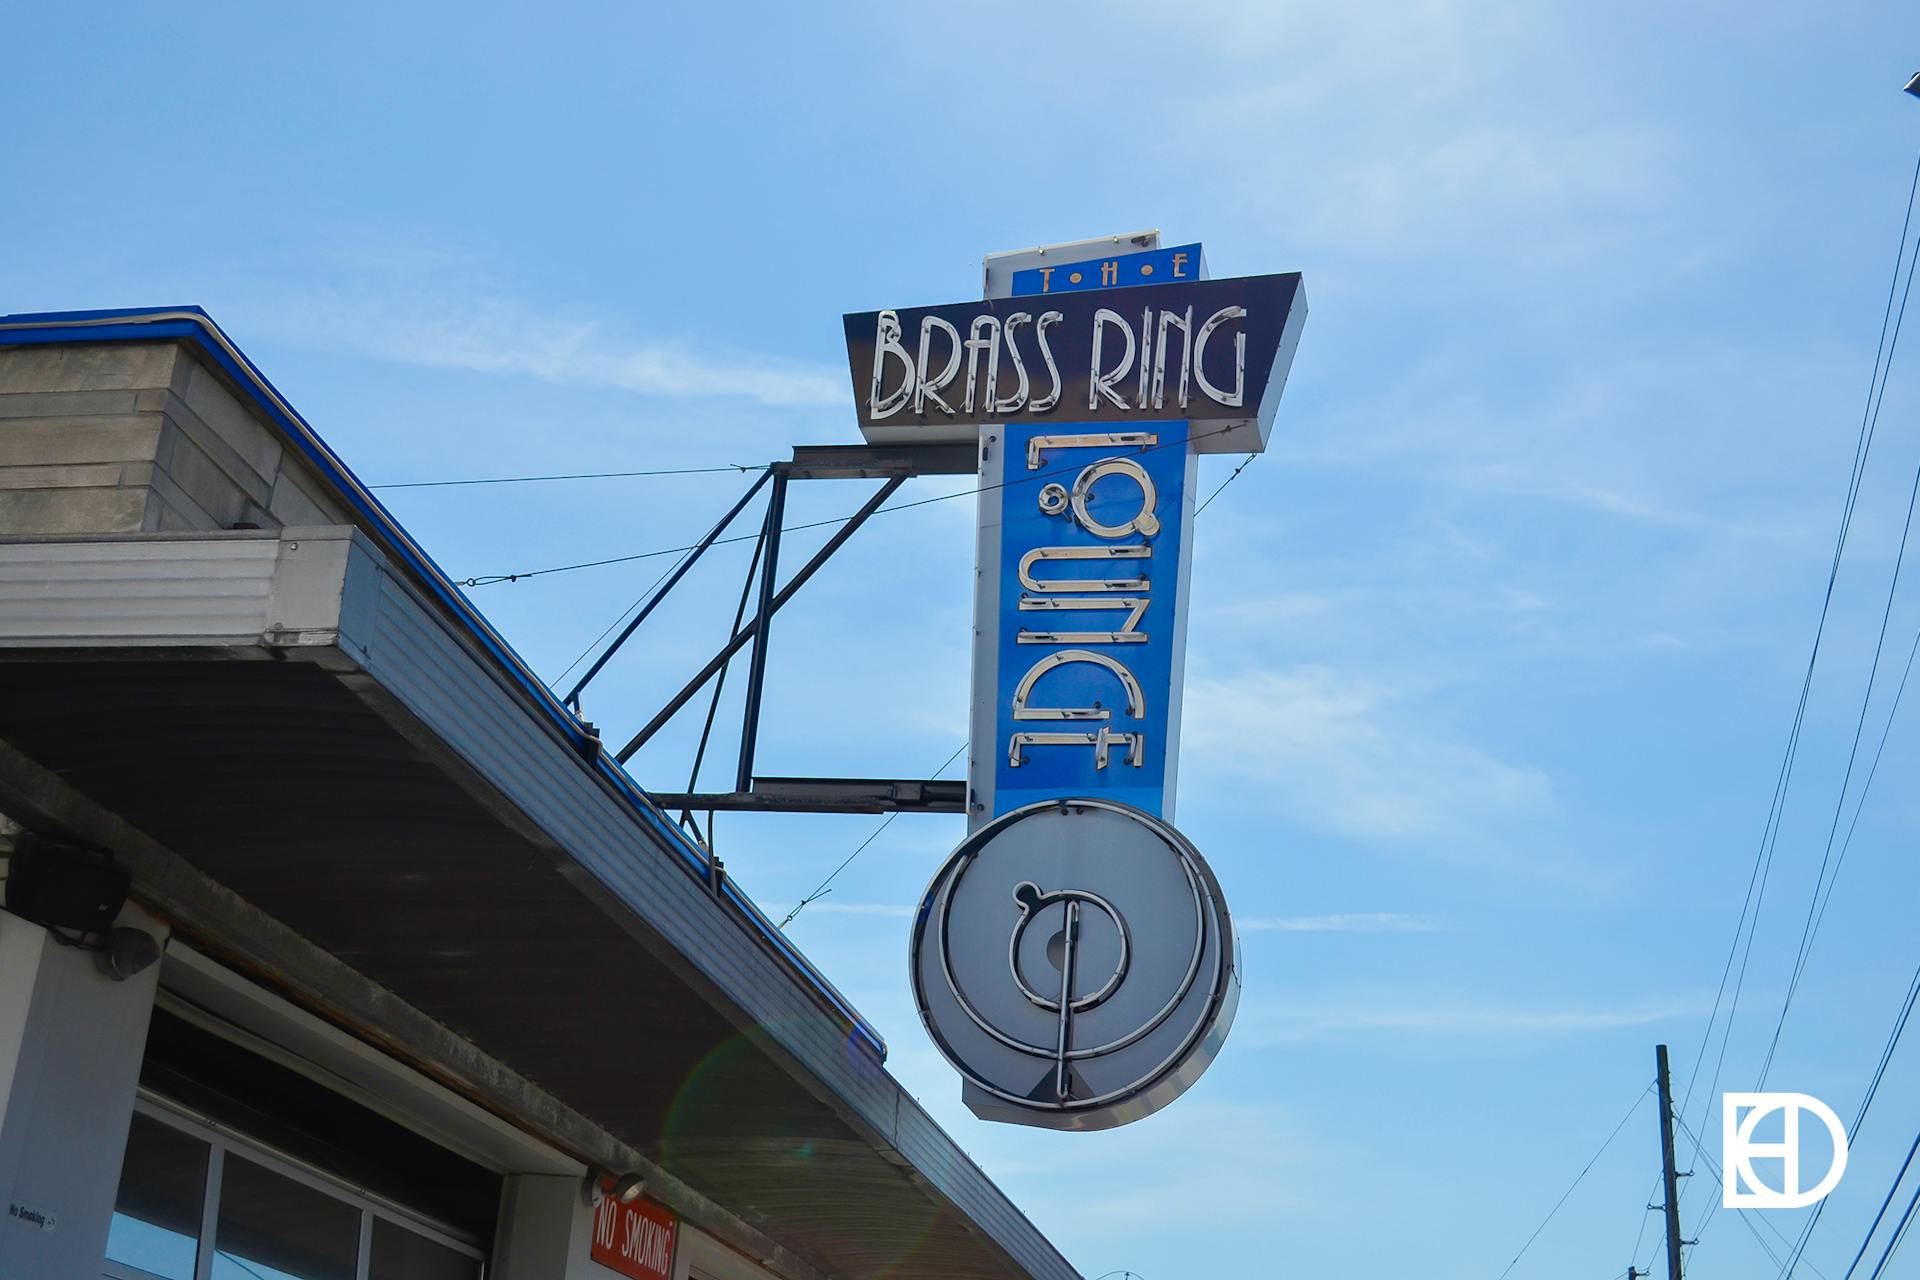 Photo of the exterior signage of The Brass Ring